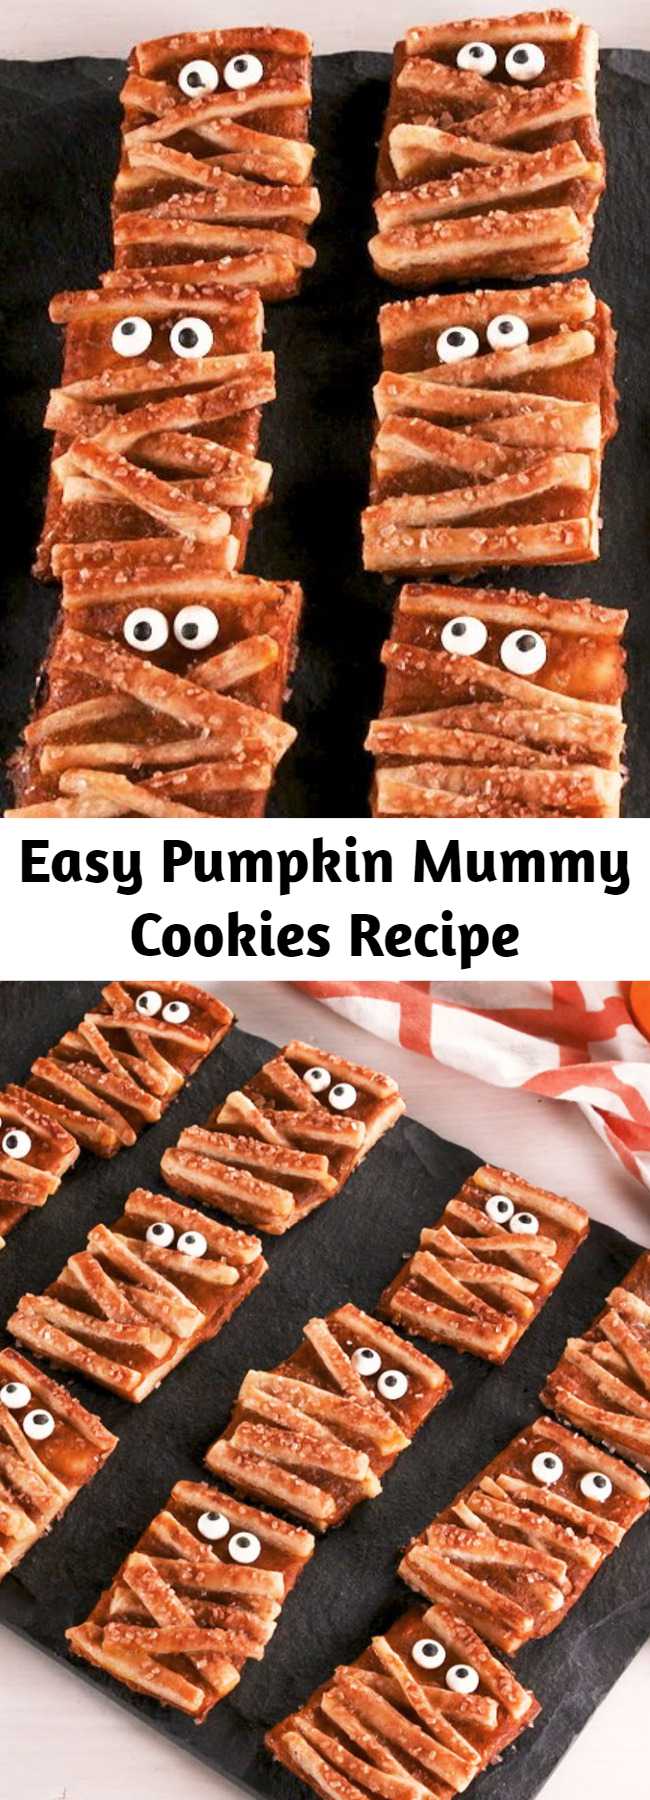 Easy Pumpkin Mummy Cookies Recipe - These adorable "cookies" are basically mini pumpkin pies. Pumpkin Mummy Cookies from Delish.com are so adorable, you'll be screaming with joy this Halloween.